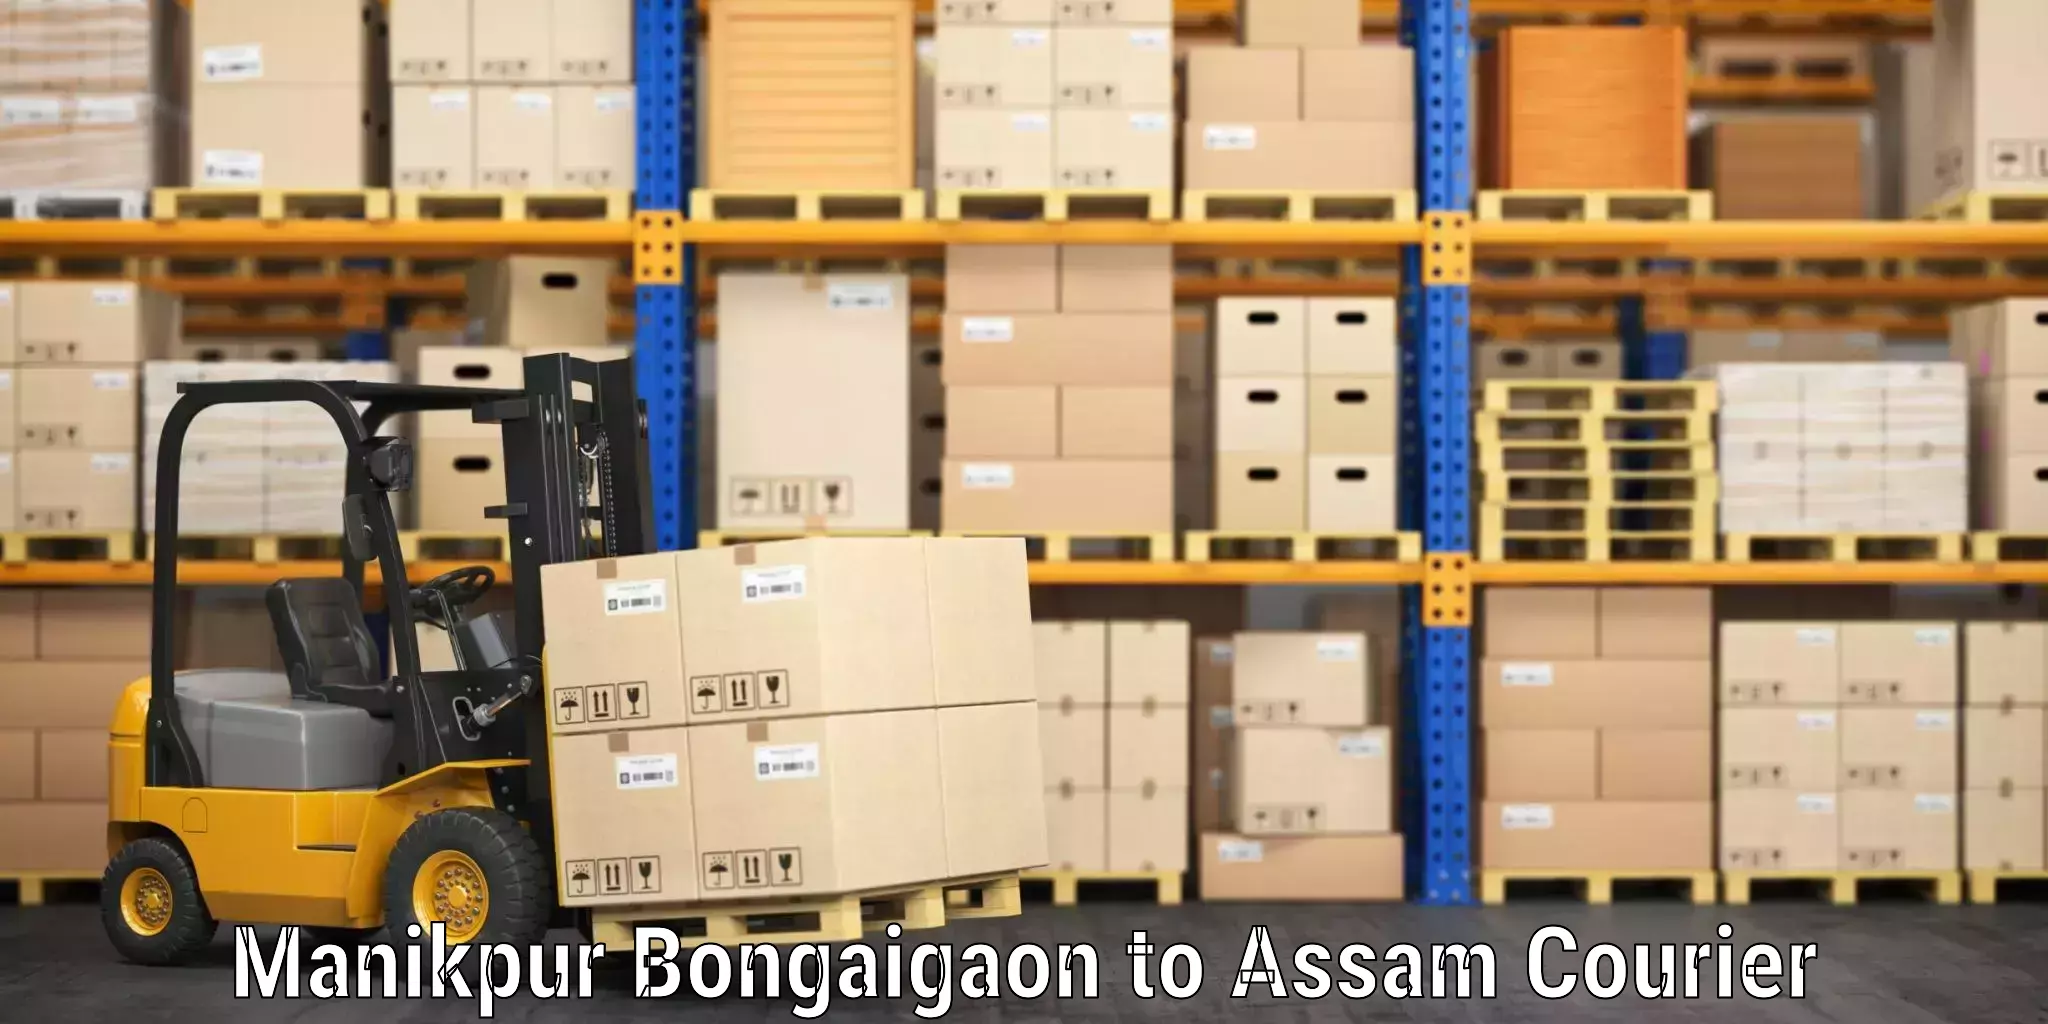 Baggage delivery solutions Manikpur Bongaigaon to Bokakhat